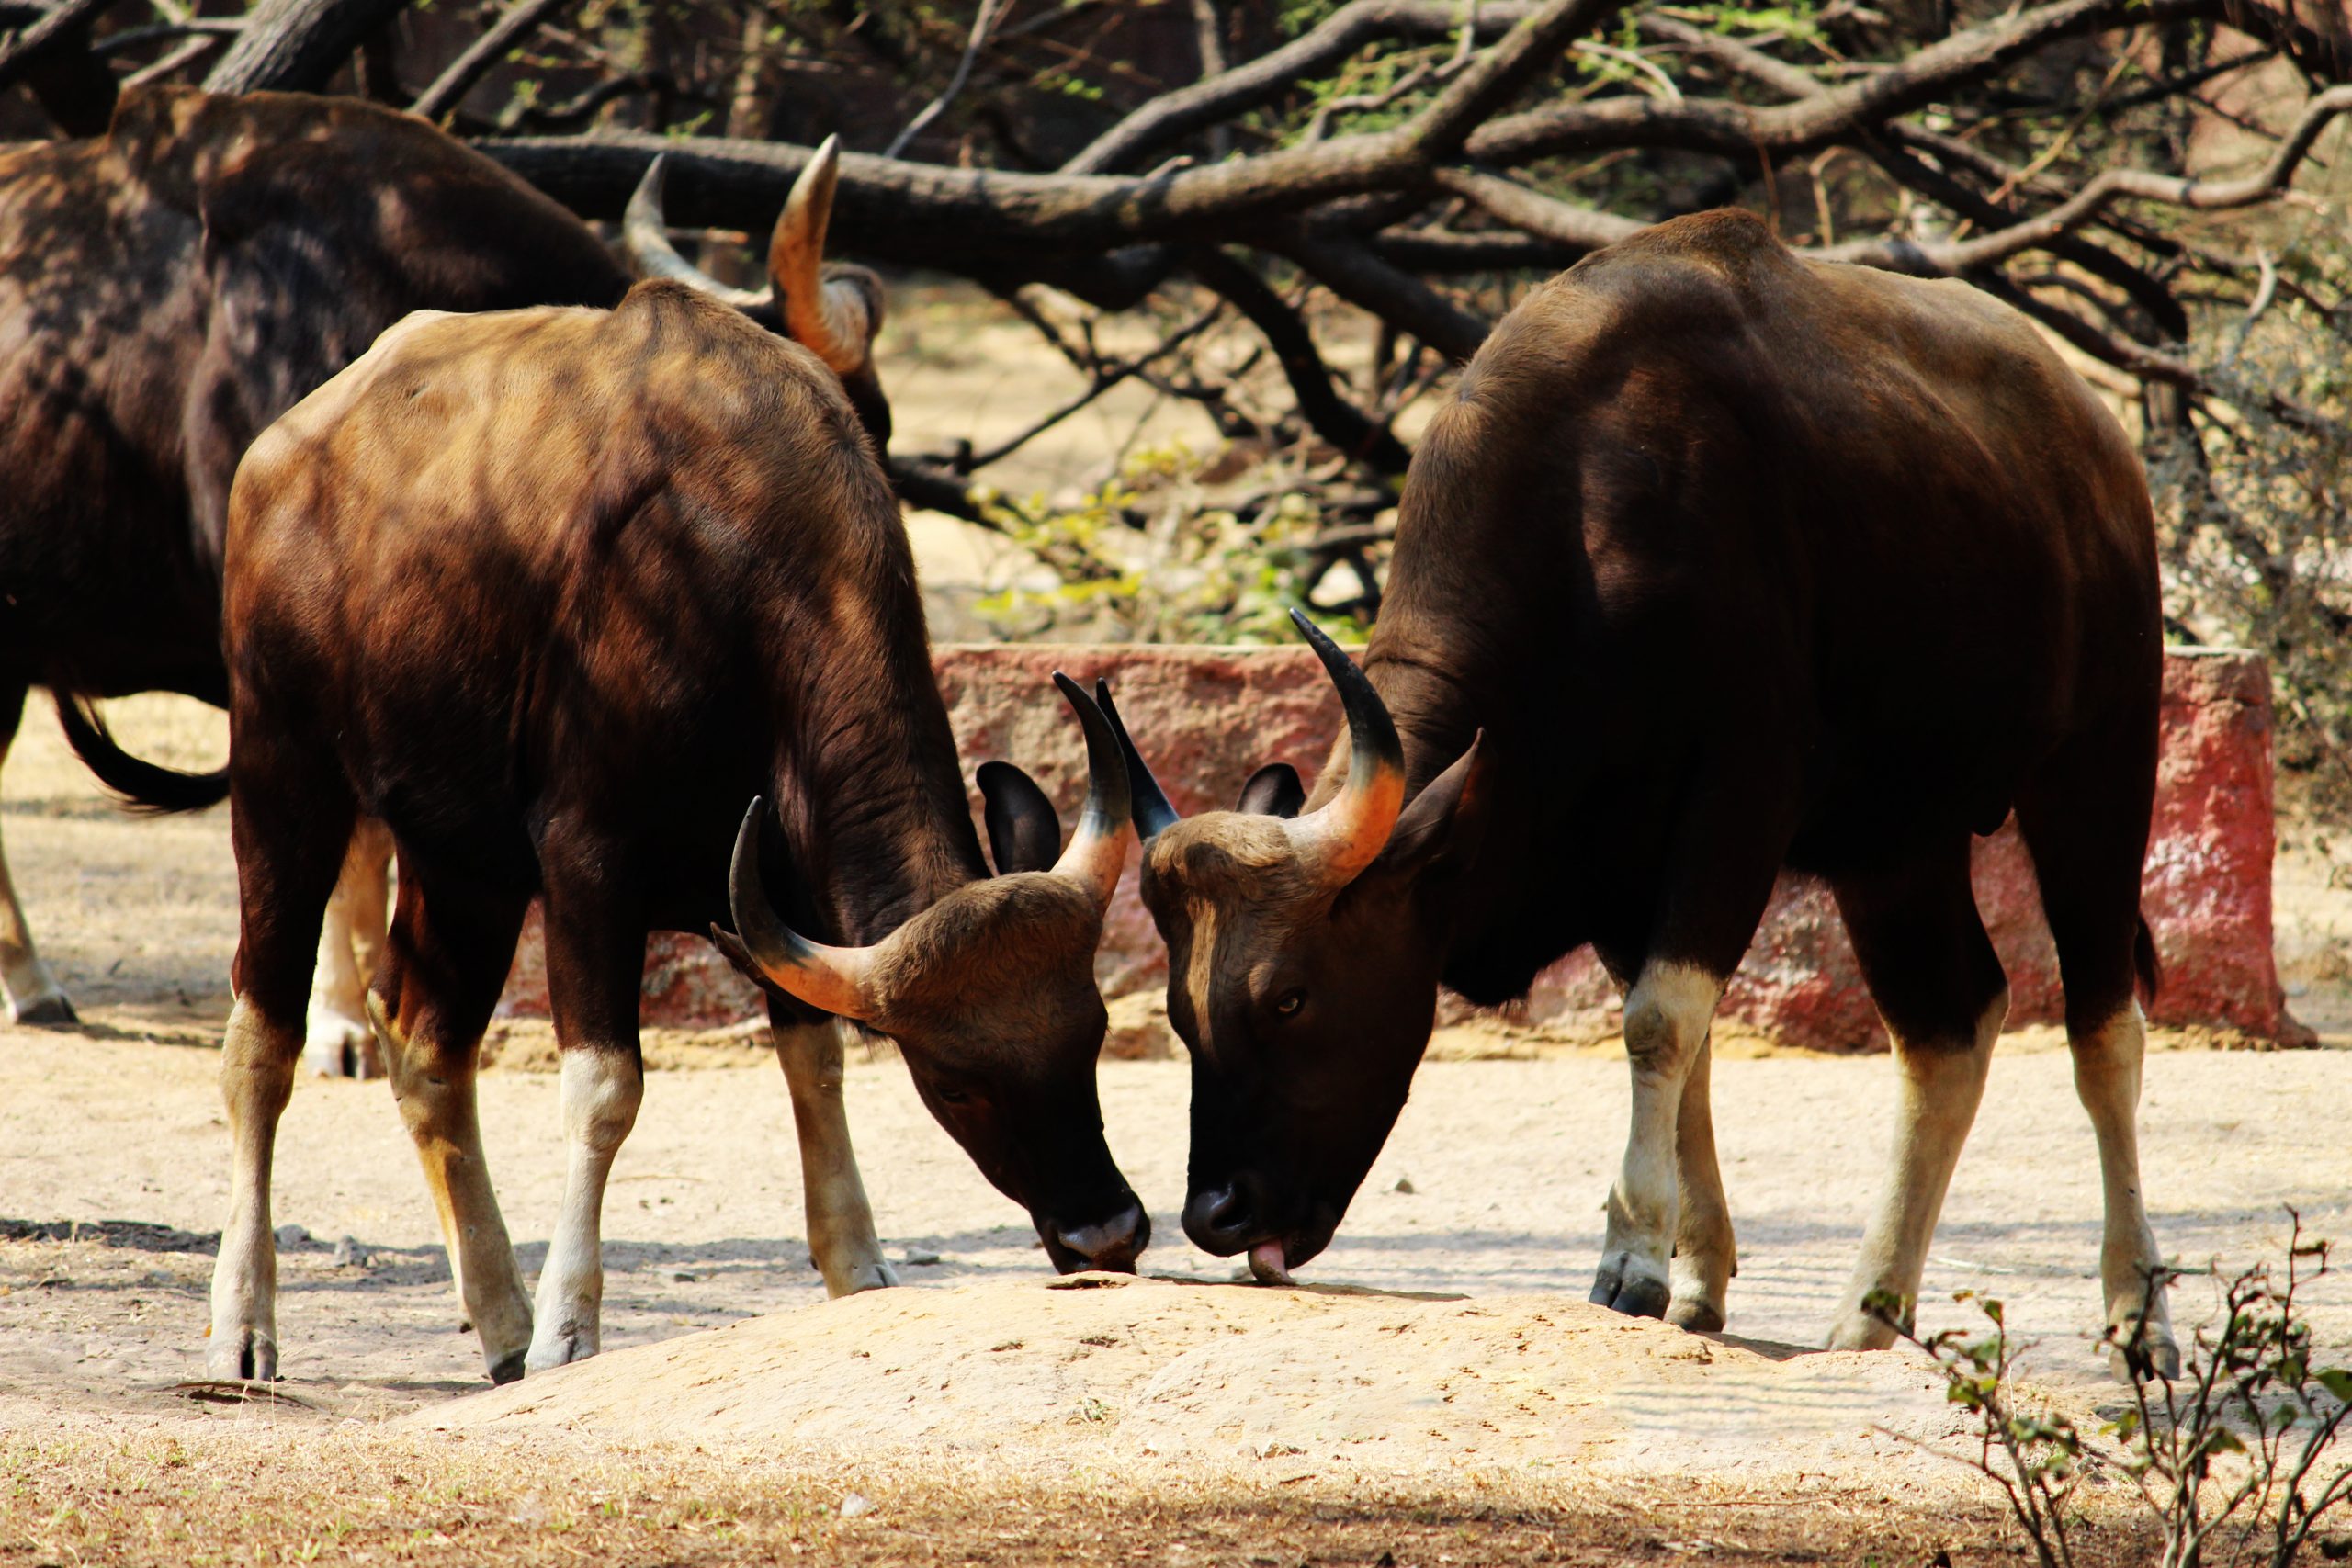 Two oxen